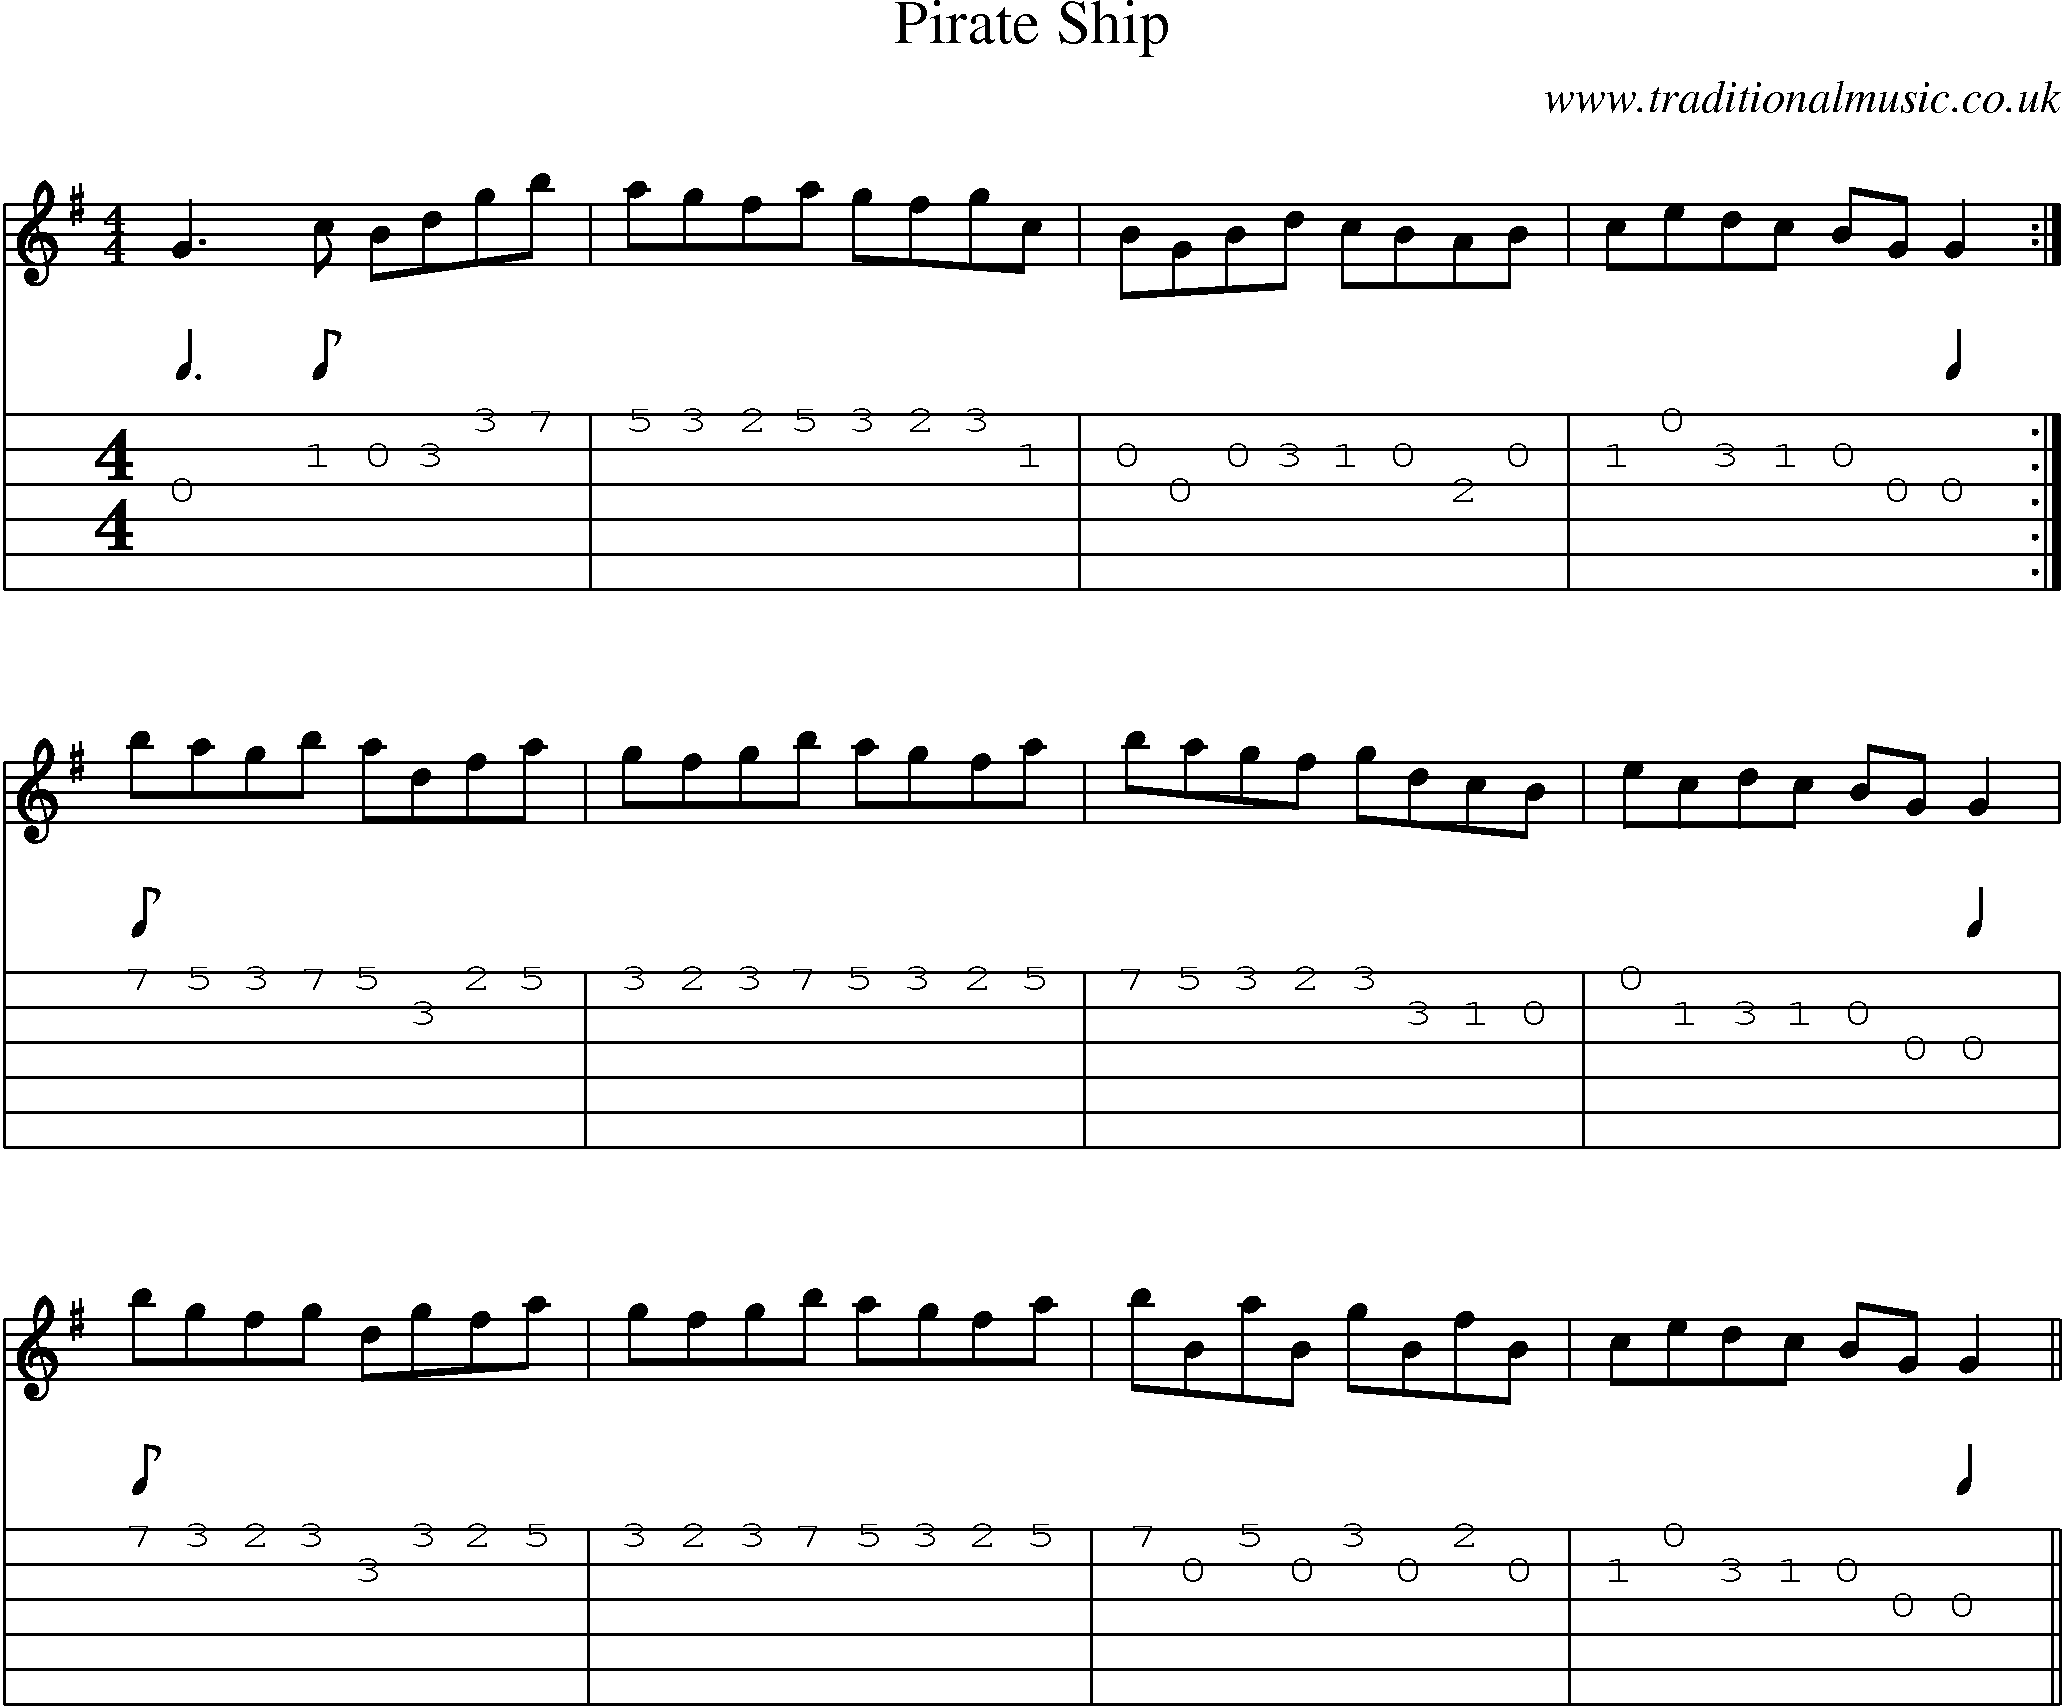 Music Score and Guitar Tabs for Pirate Ship